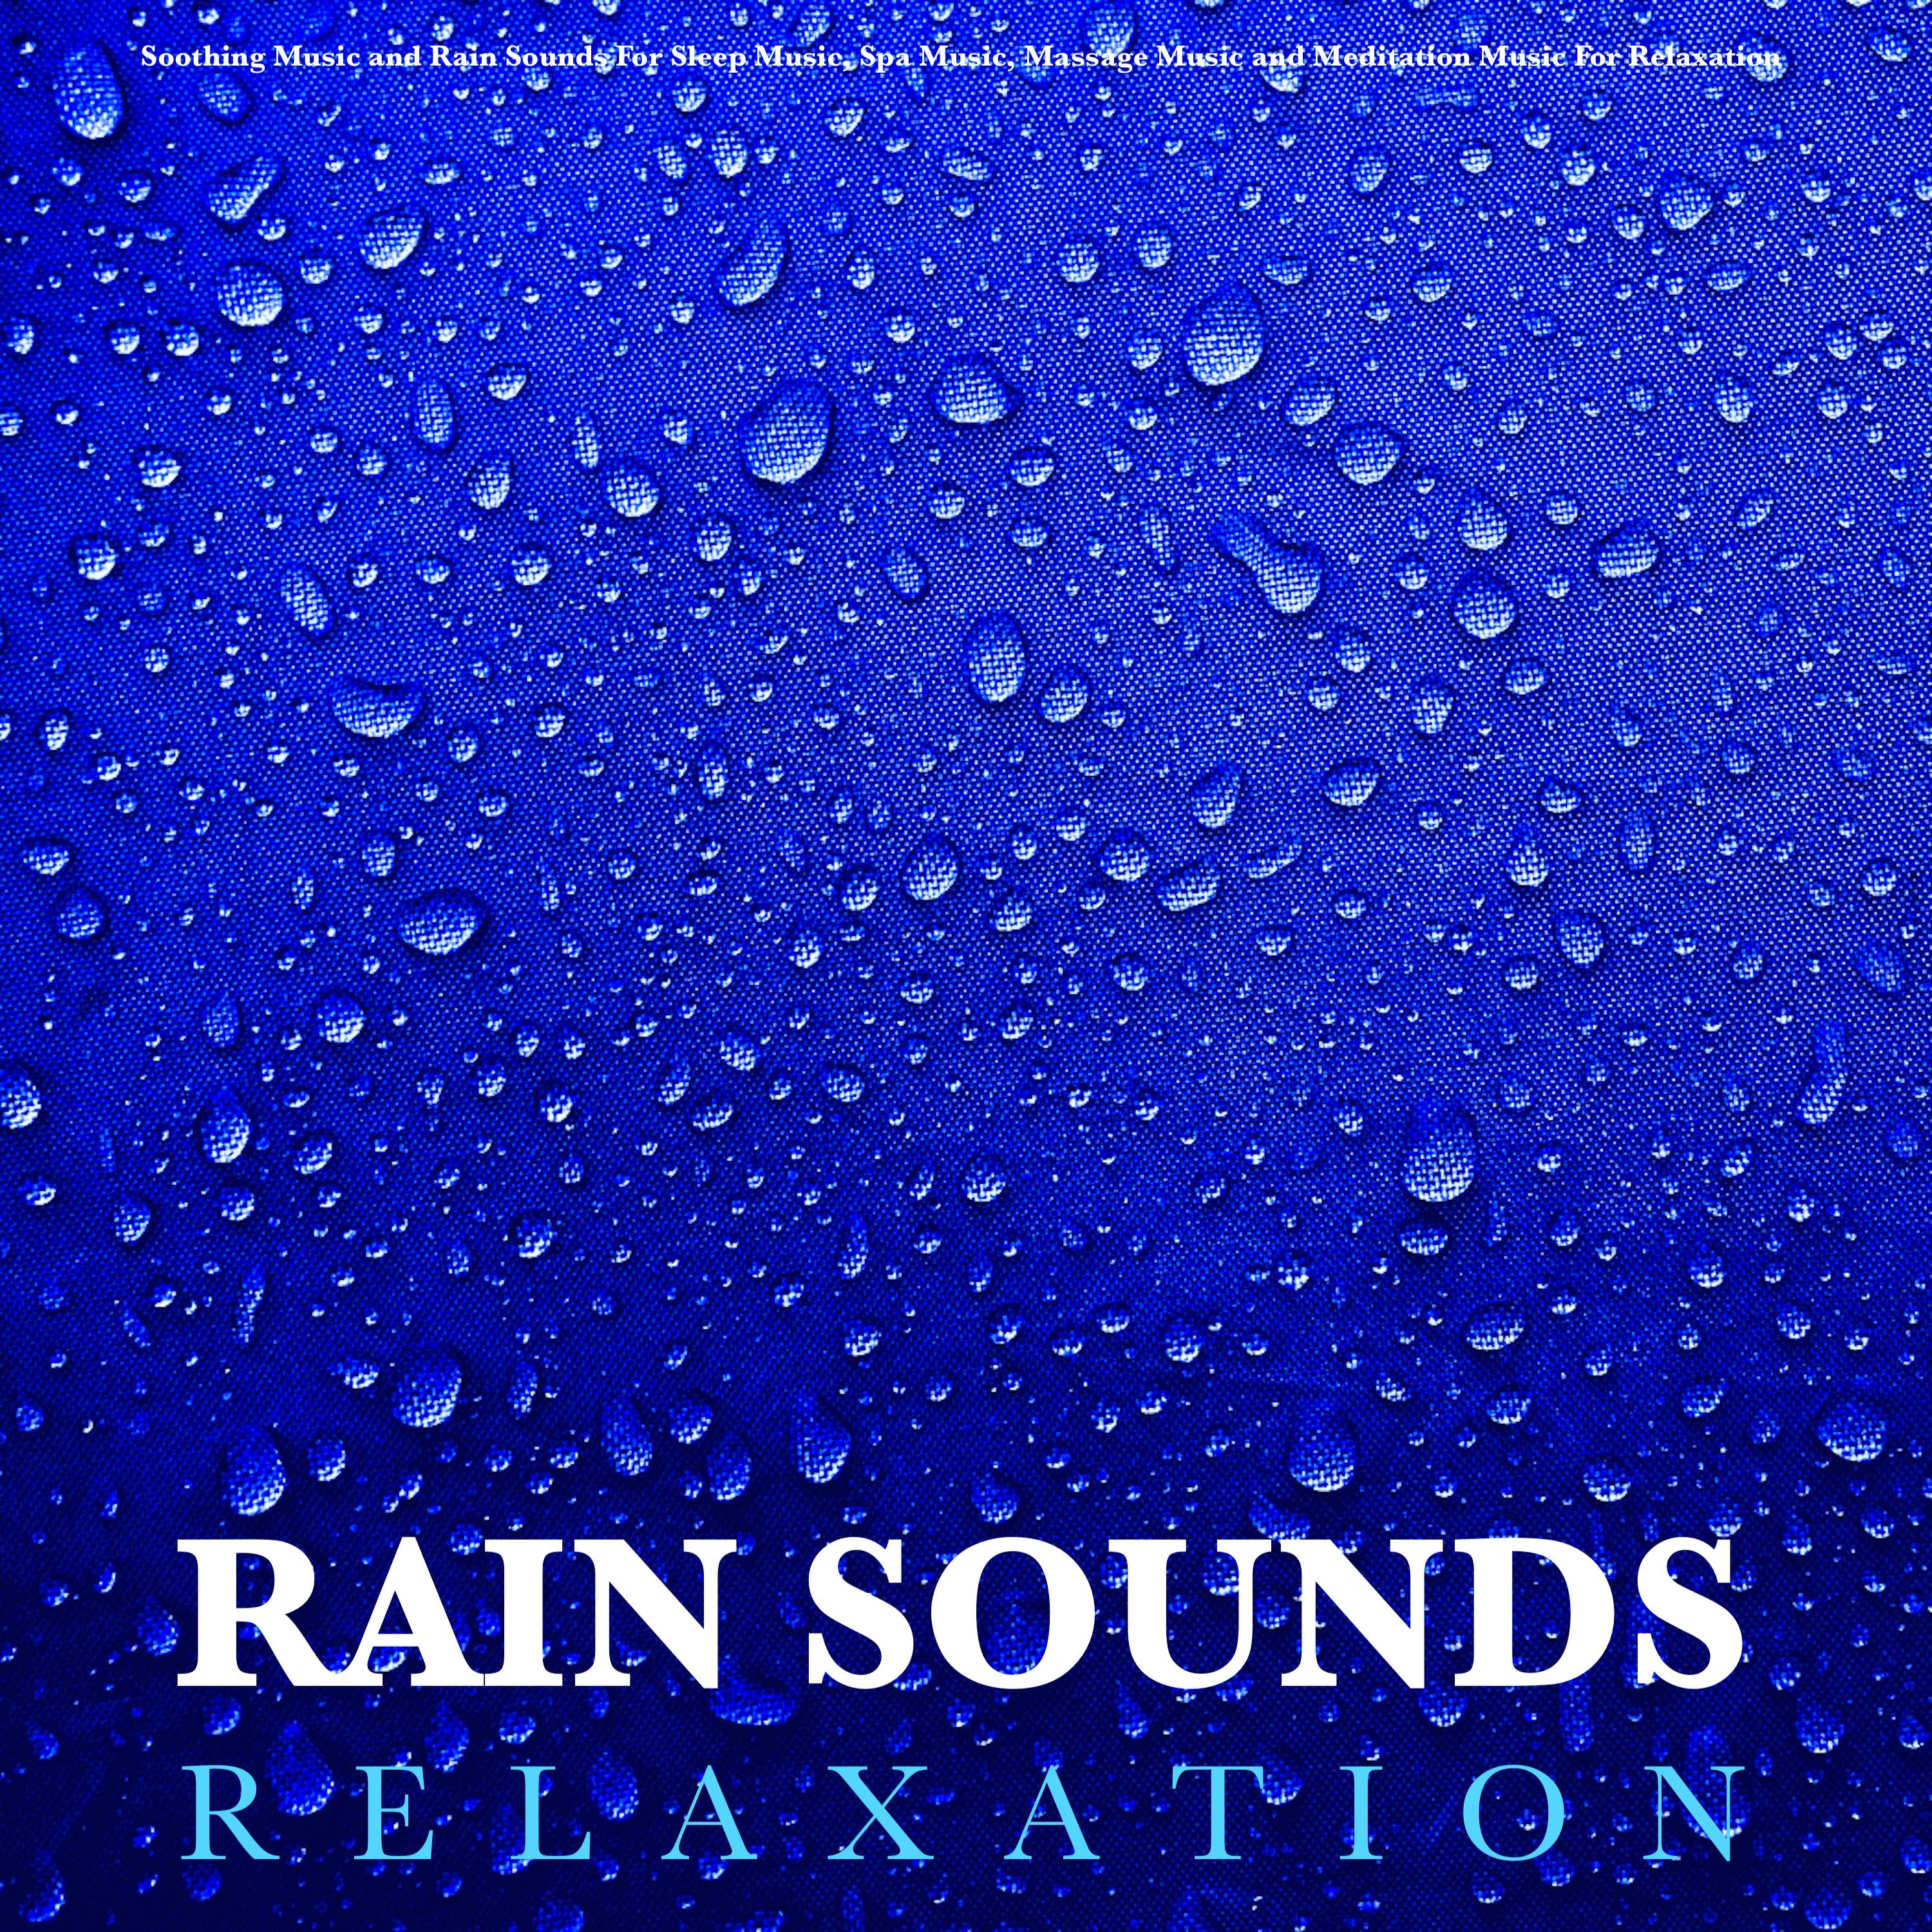 Spa Music With Rain Sounds For Relaxation